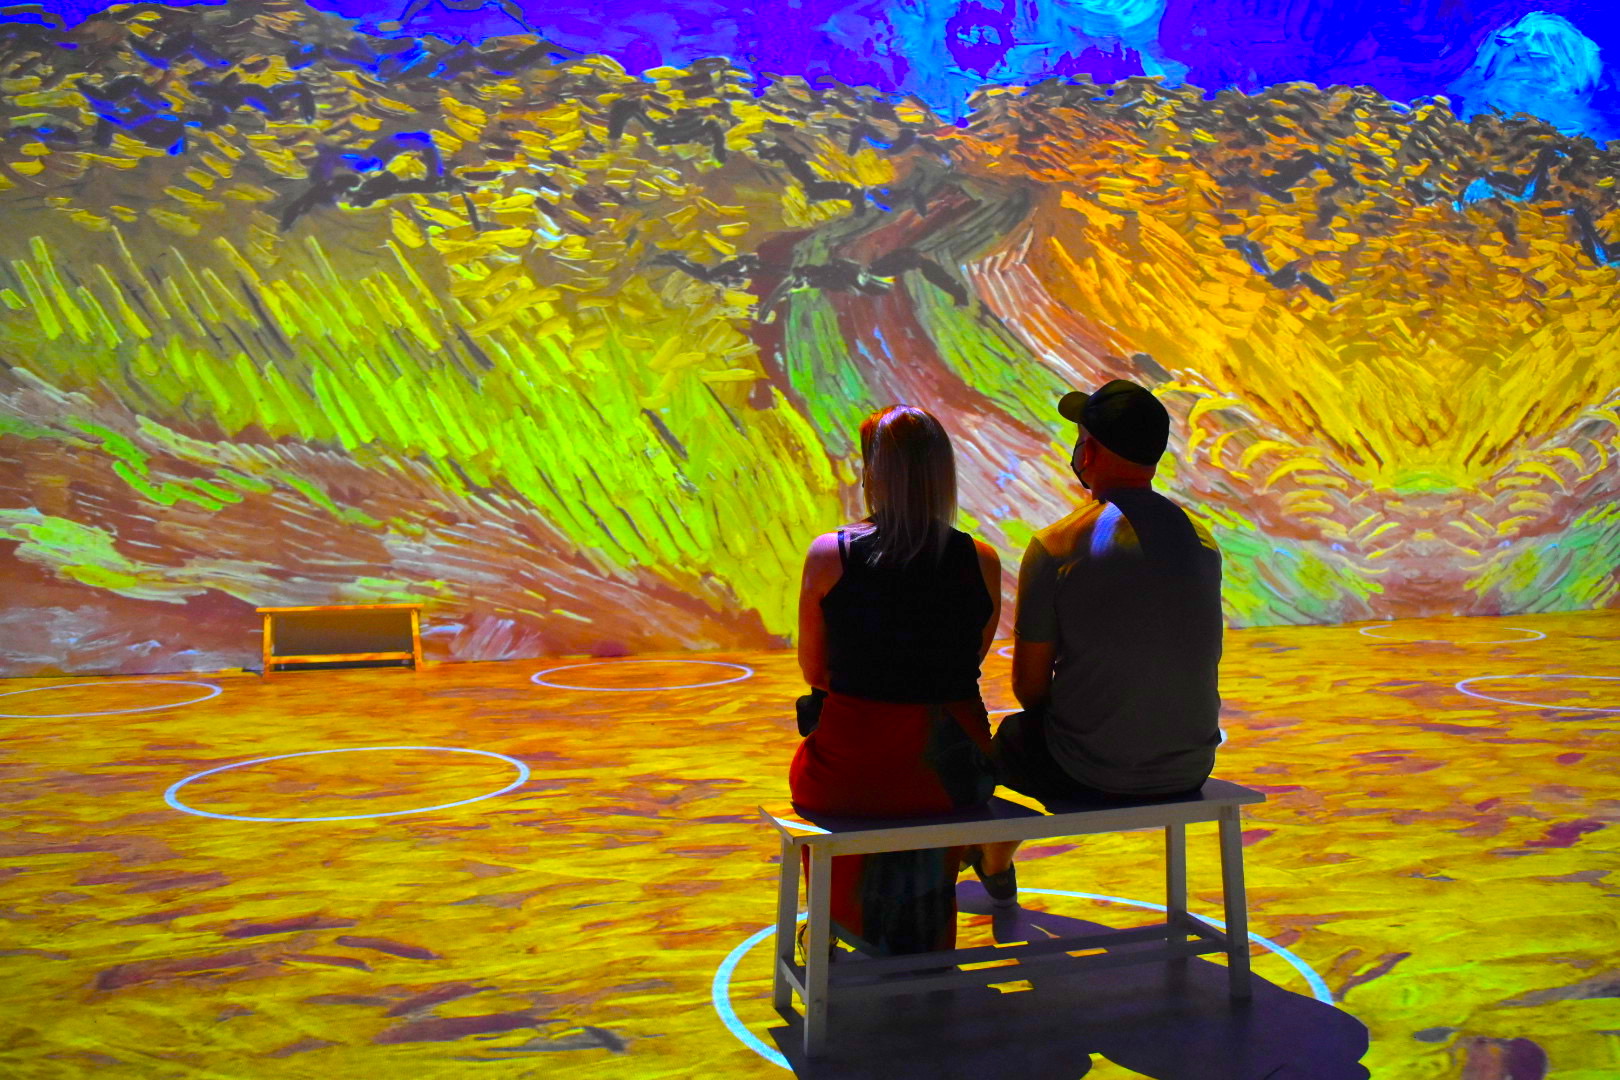 The Company Behind the Wildly Popular 'Immersive Van Gogh' Experience Has Filed for Bankruptcy